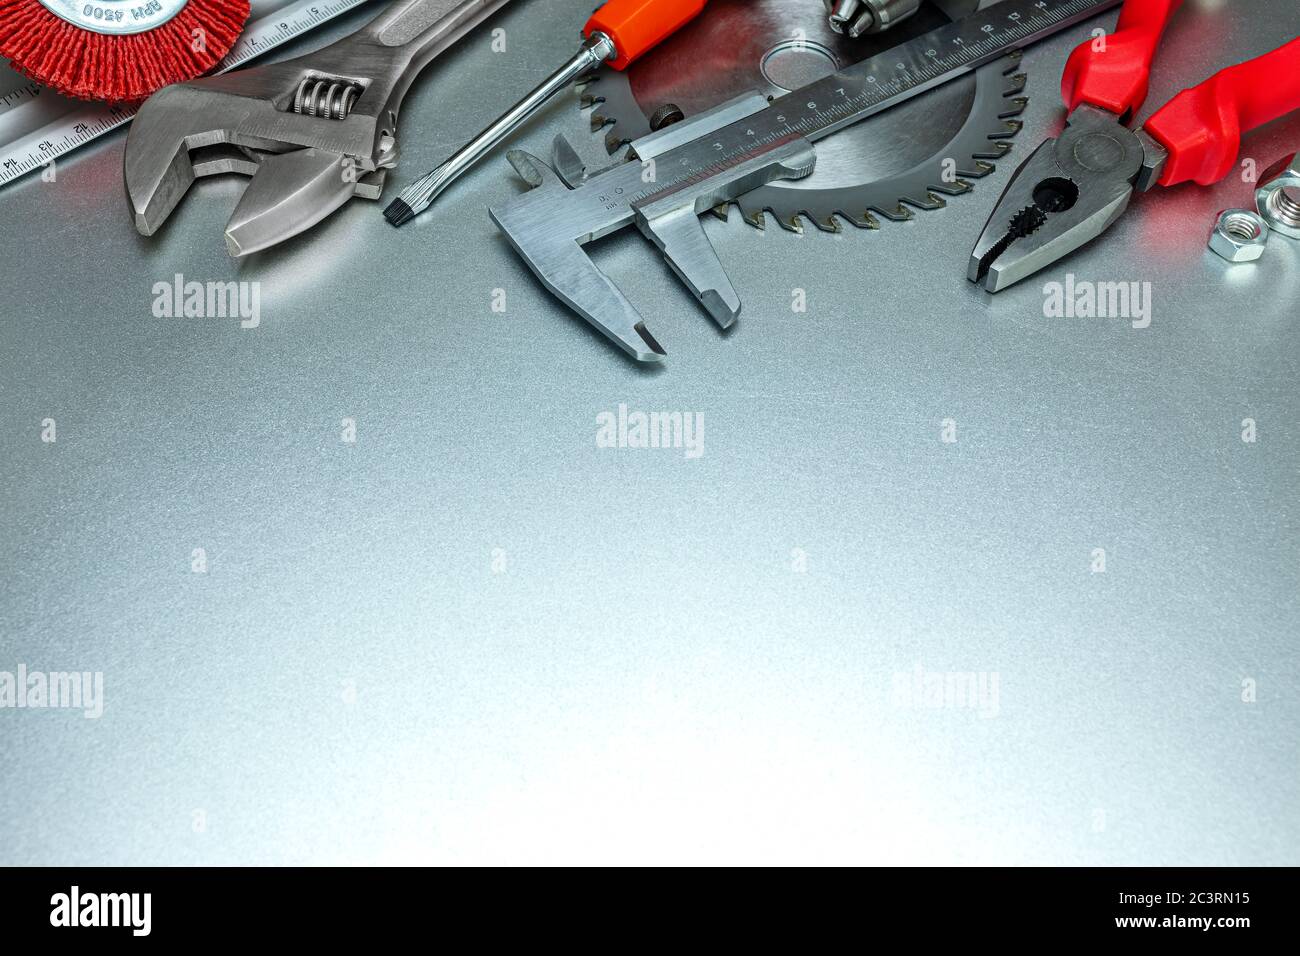 set of professional working tools - wrench, pliers, vernier caliper and circular saw blade. grey metal background Stock Photo